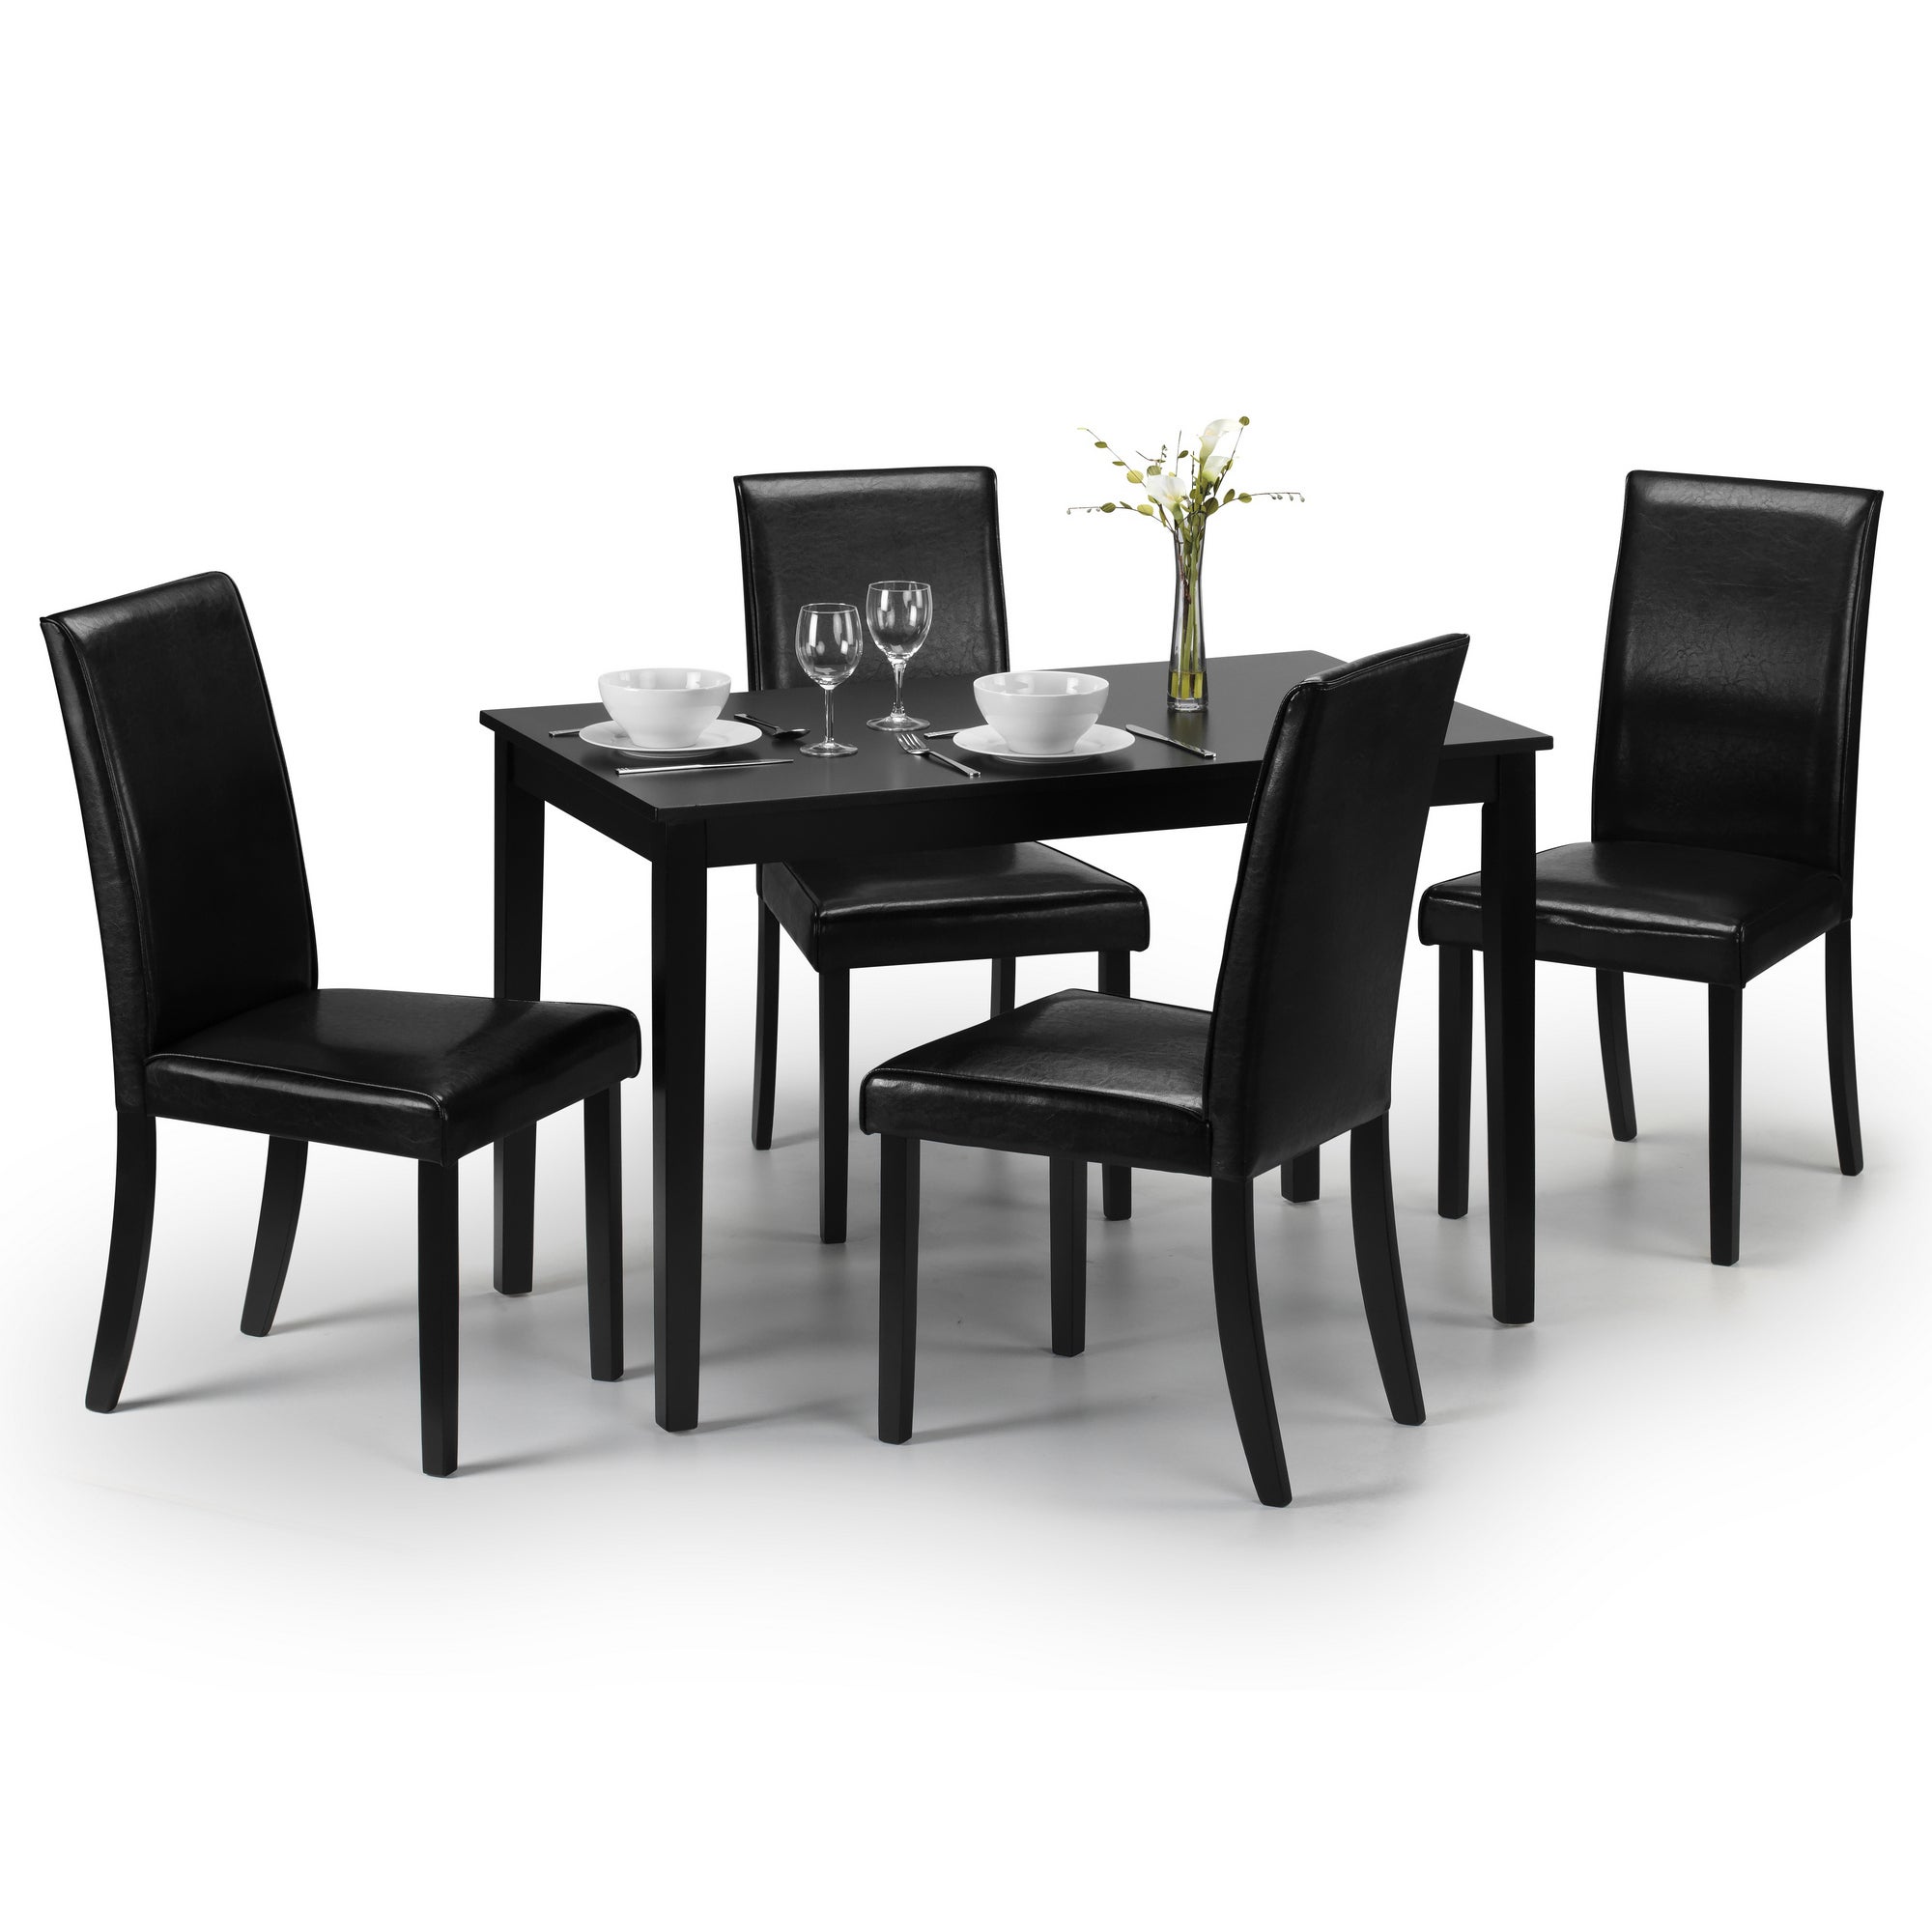 Hudson Round Dining Table With 4 Chairs Black Black